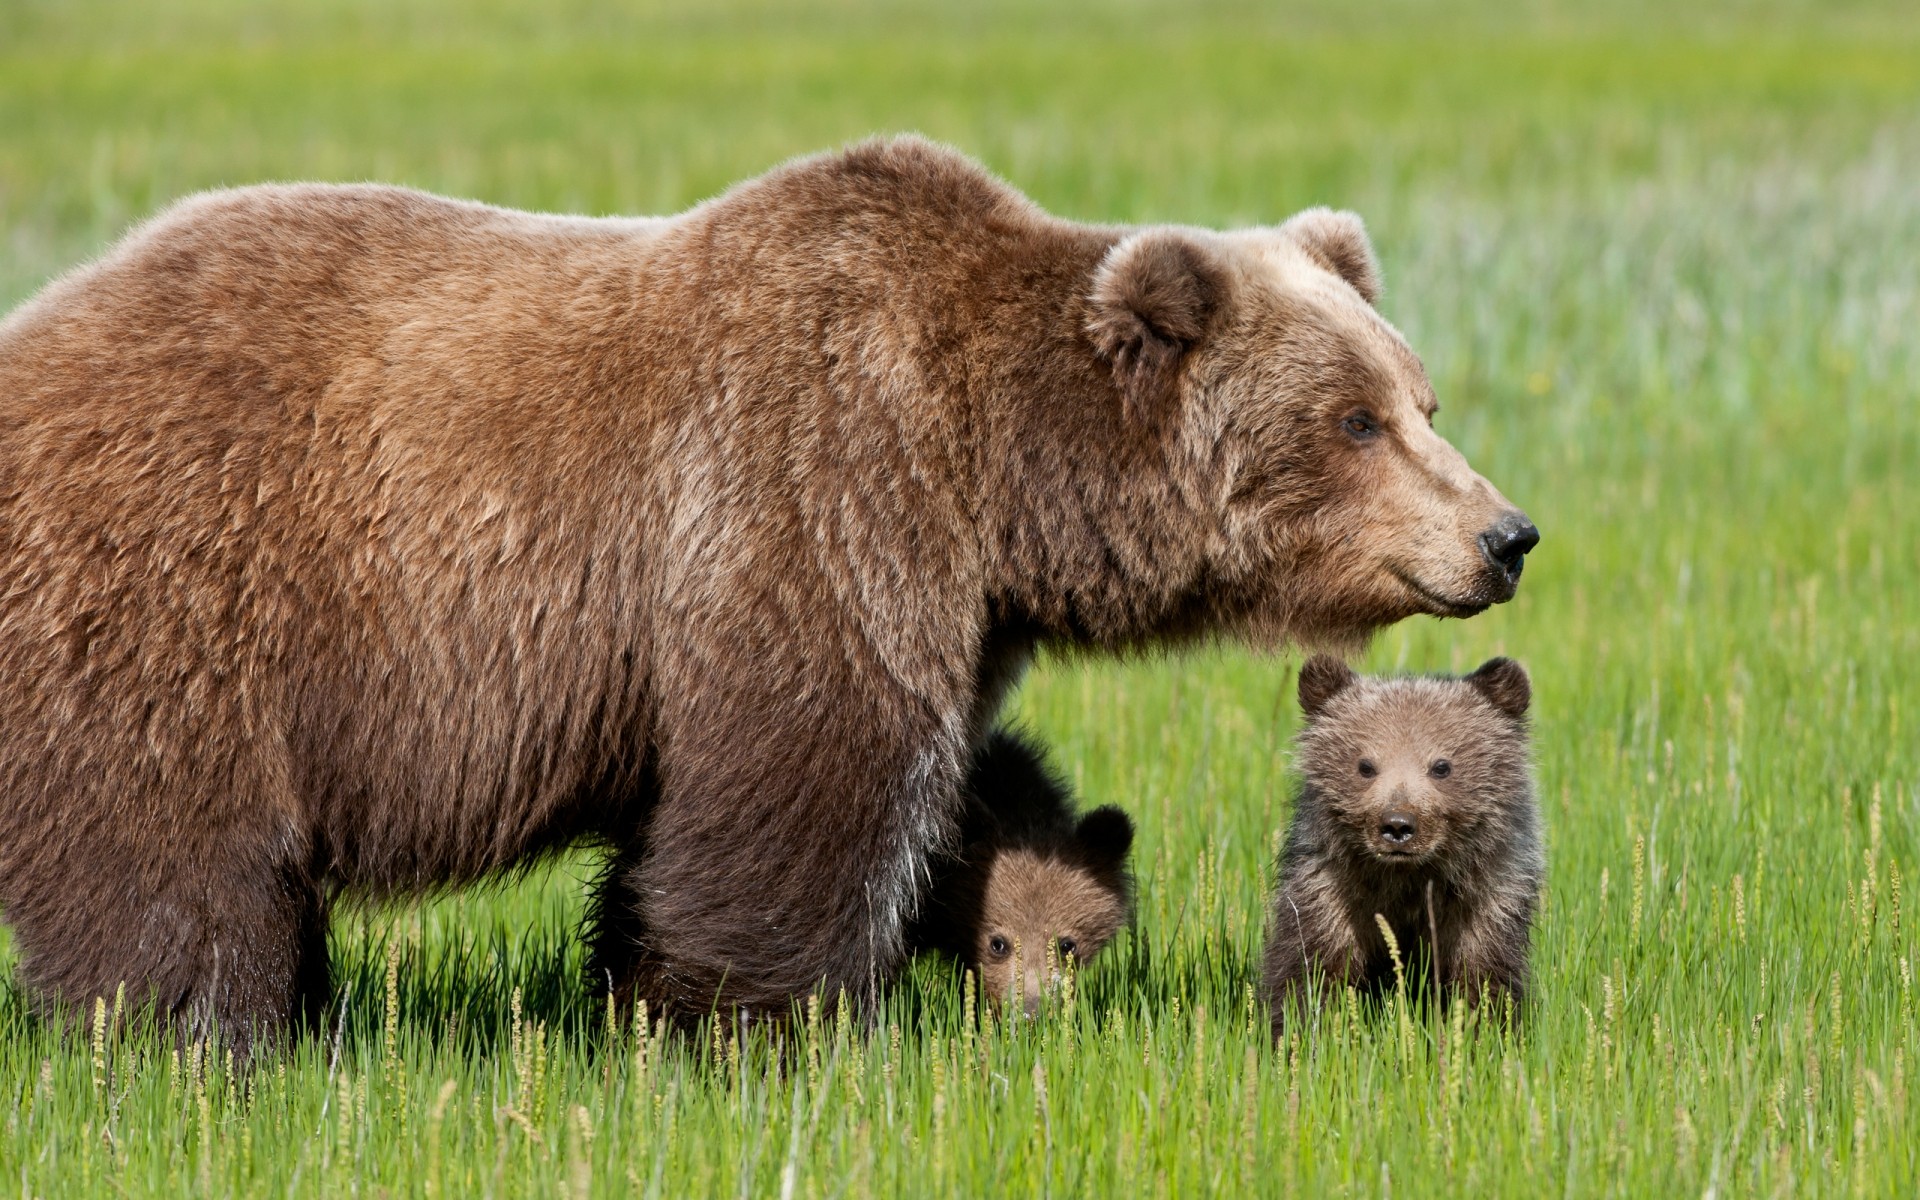 animals mammal wildlife grass outdoors hayfield nature animal wild grizzly fur cub bear cubs